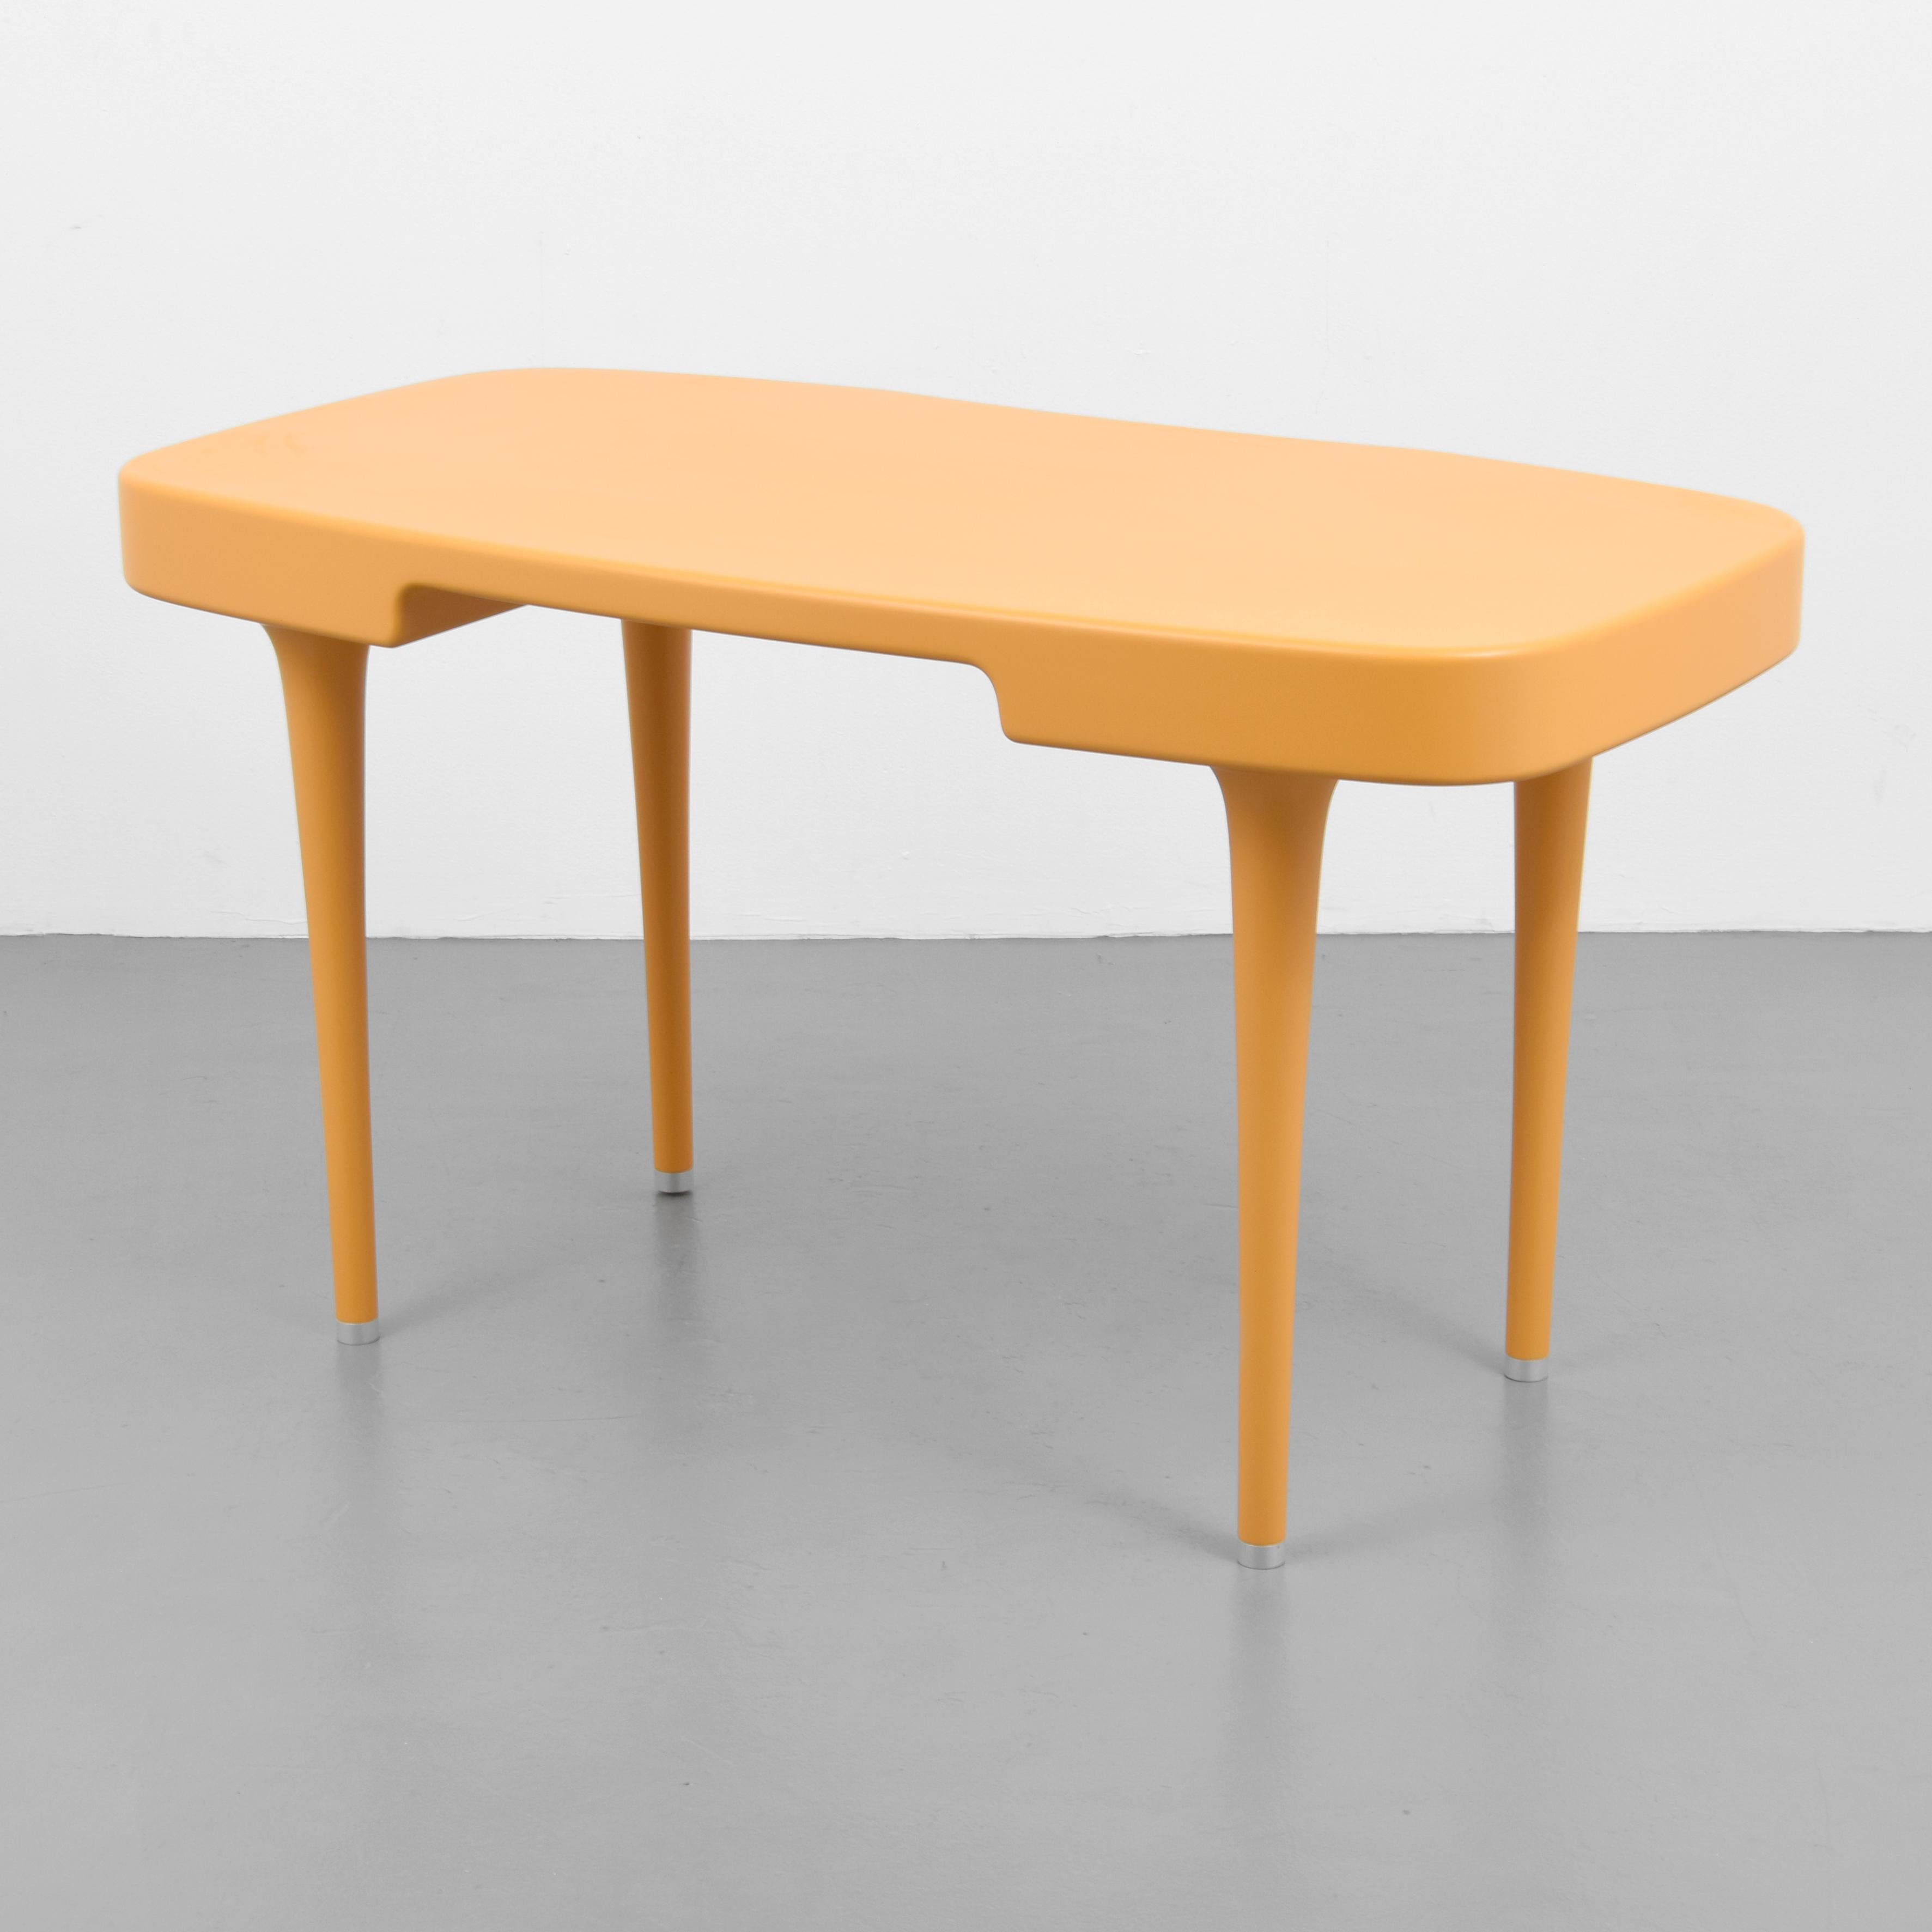 Artist/Designer: Marc Newson (Australian, b. 1963); Cappellini

Additional Information: Marc Newson is one of the most influential modern designers. His work is in the permanent collections of major museums worldwide.

Marking(s); notes: no